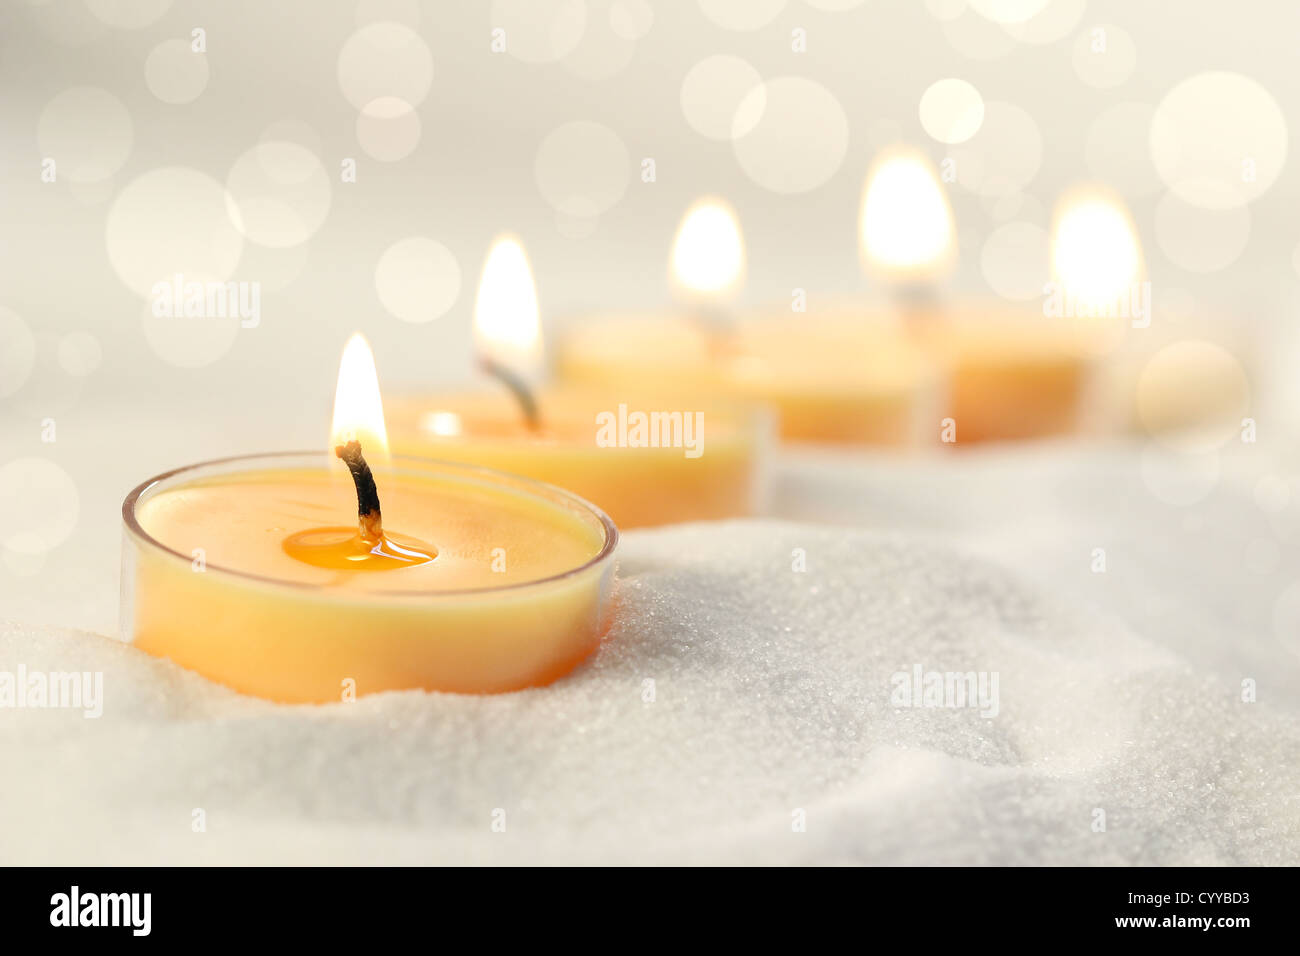 Votive candles in sand lit and arranged for ambiance Stock Photo